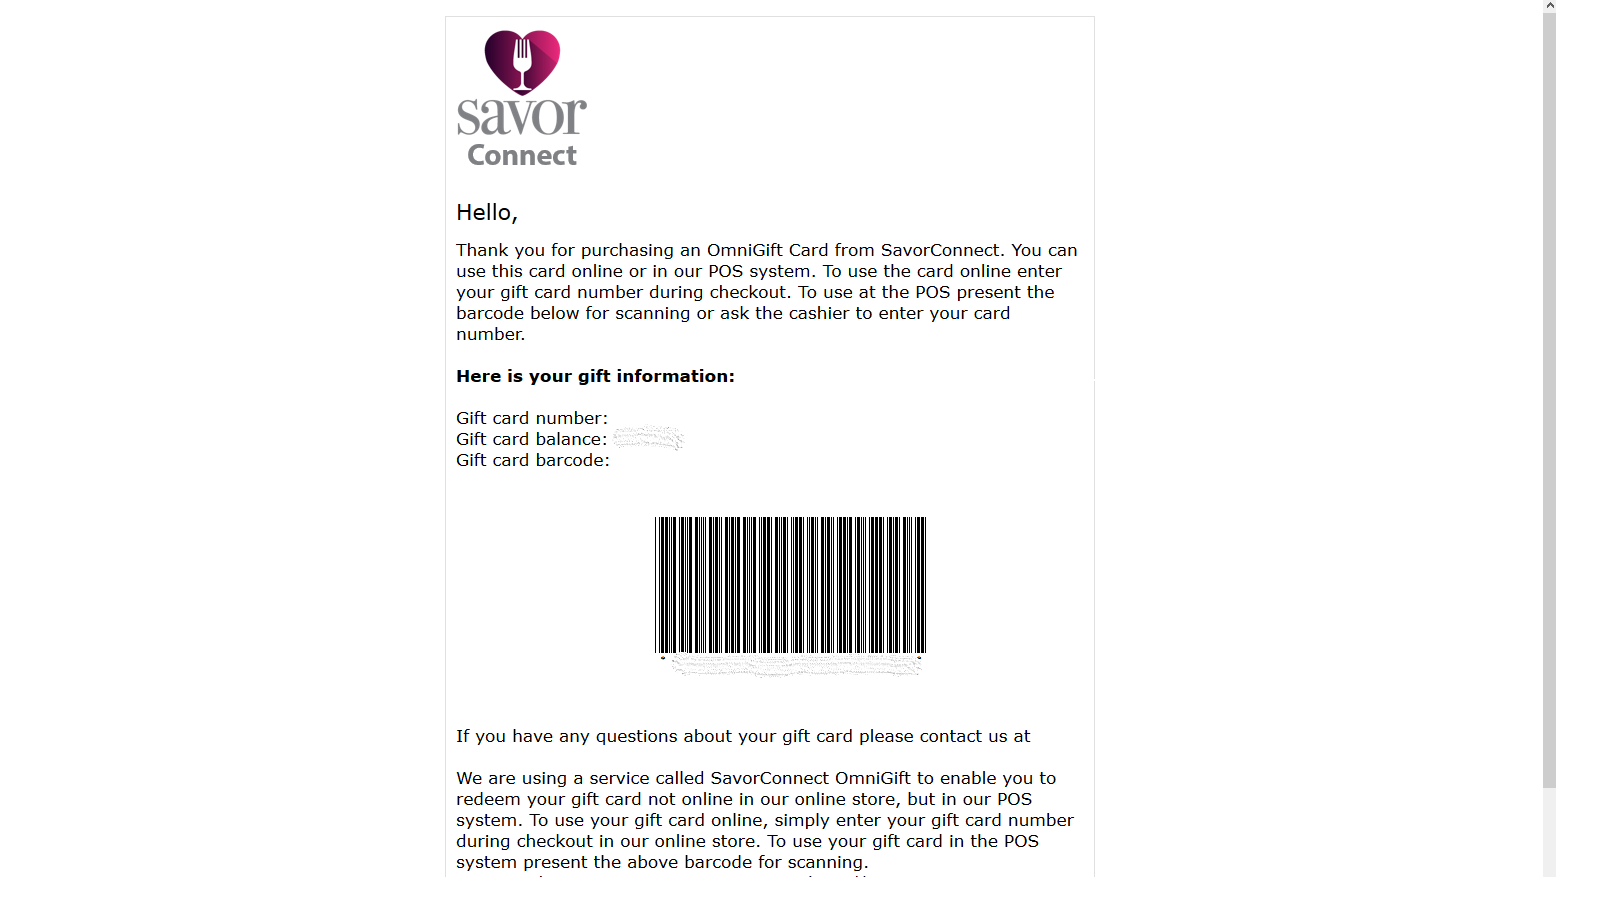 Issued OmniGift card email